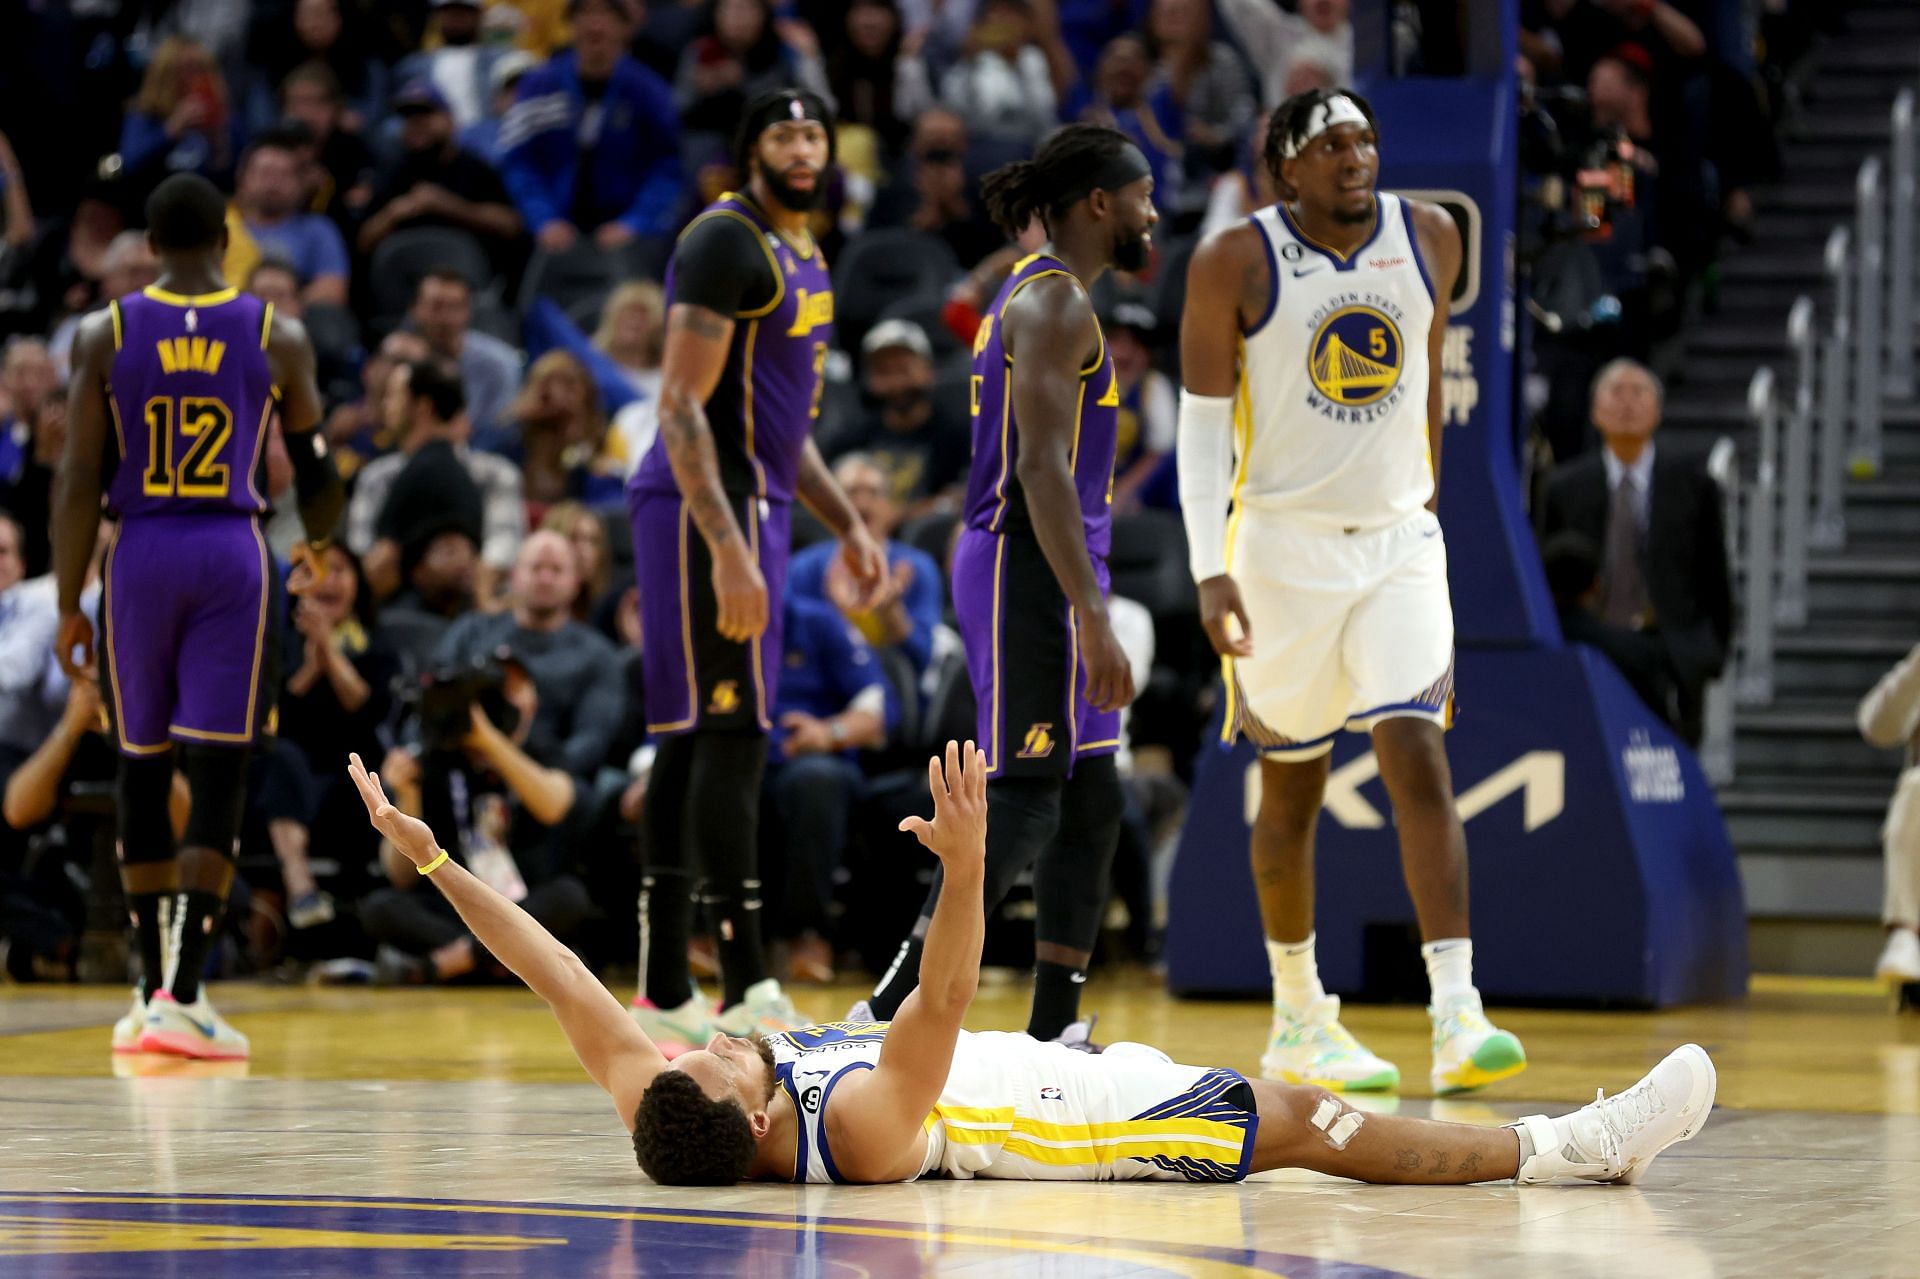 LA Lakers team looks on at Steph Curry celebrating a shot